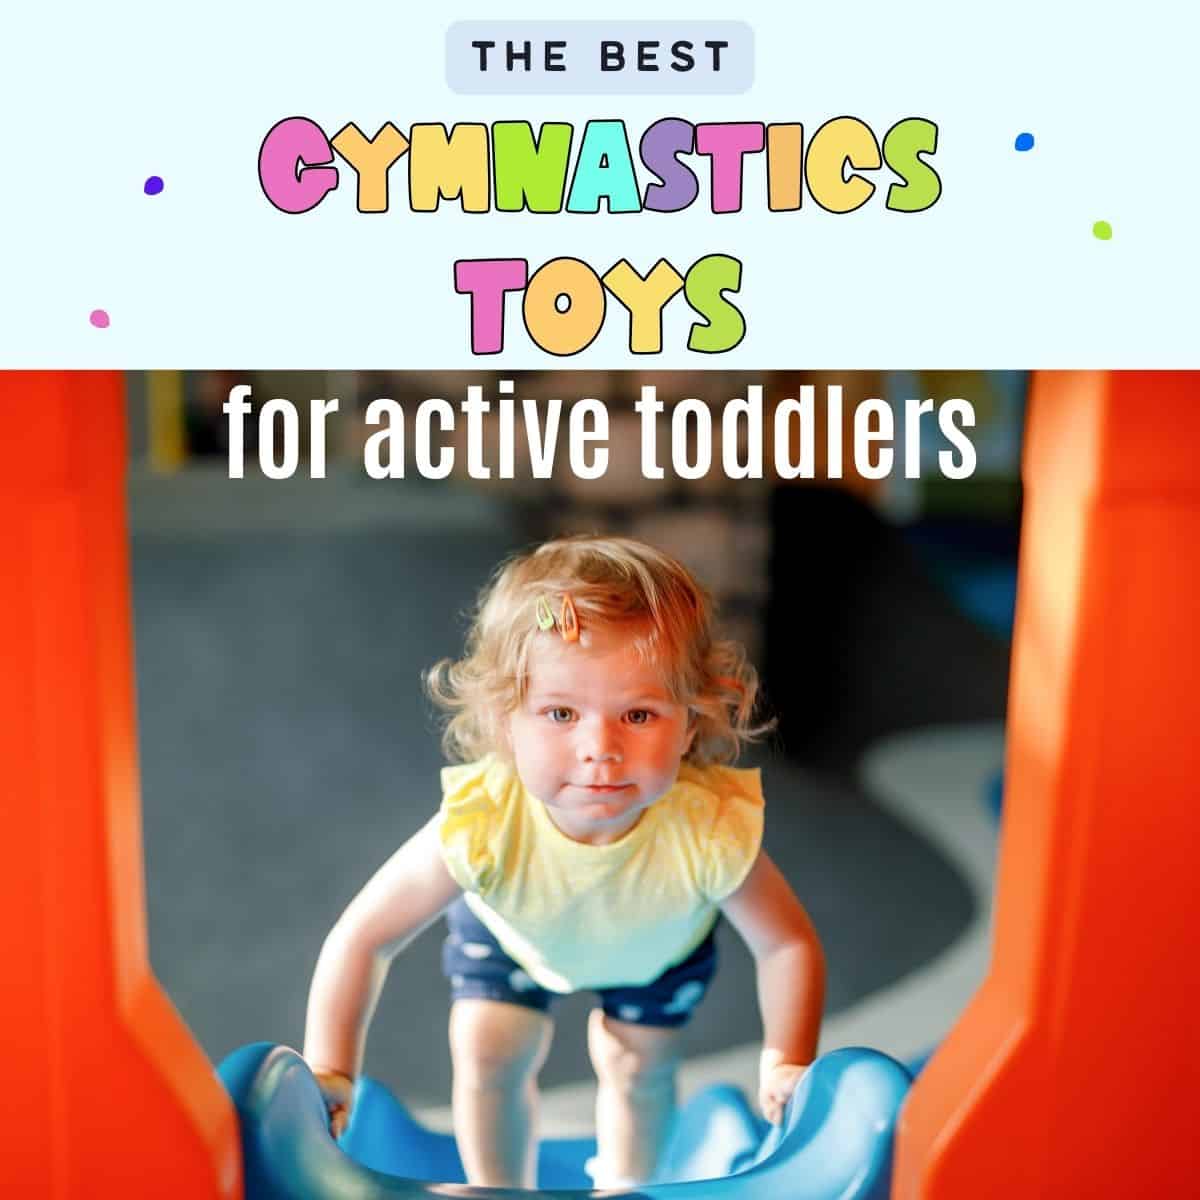 Text "the best gymnastics toys for active toddlers" with a picture of a toddler girl climbing up a slide